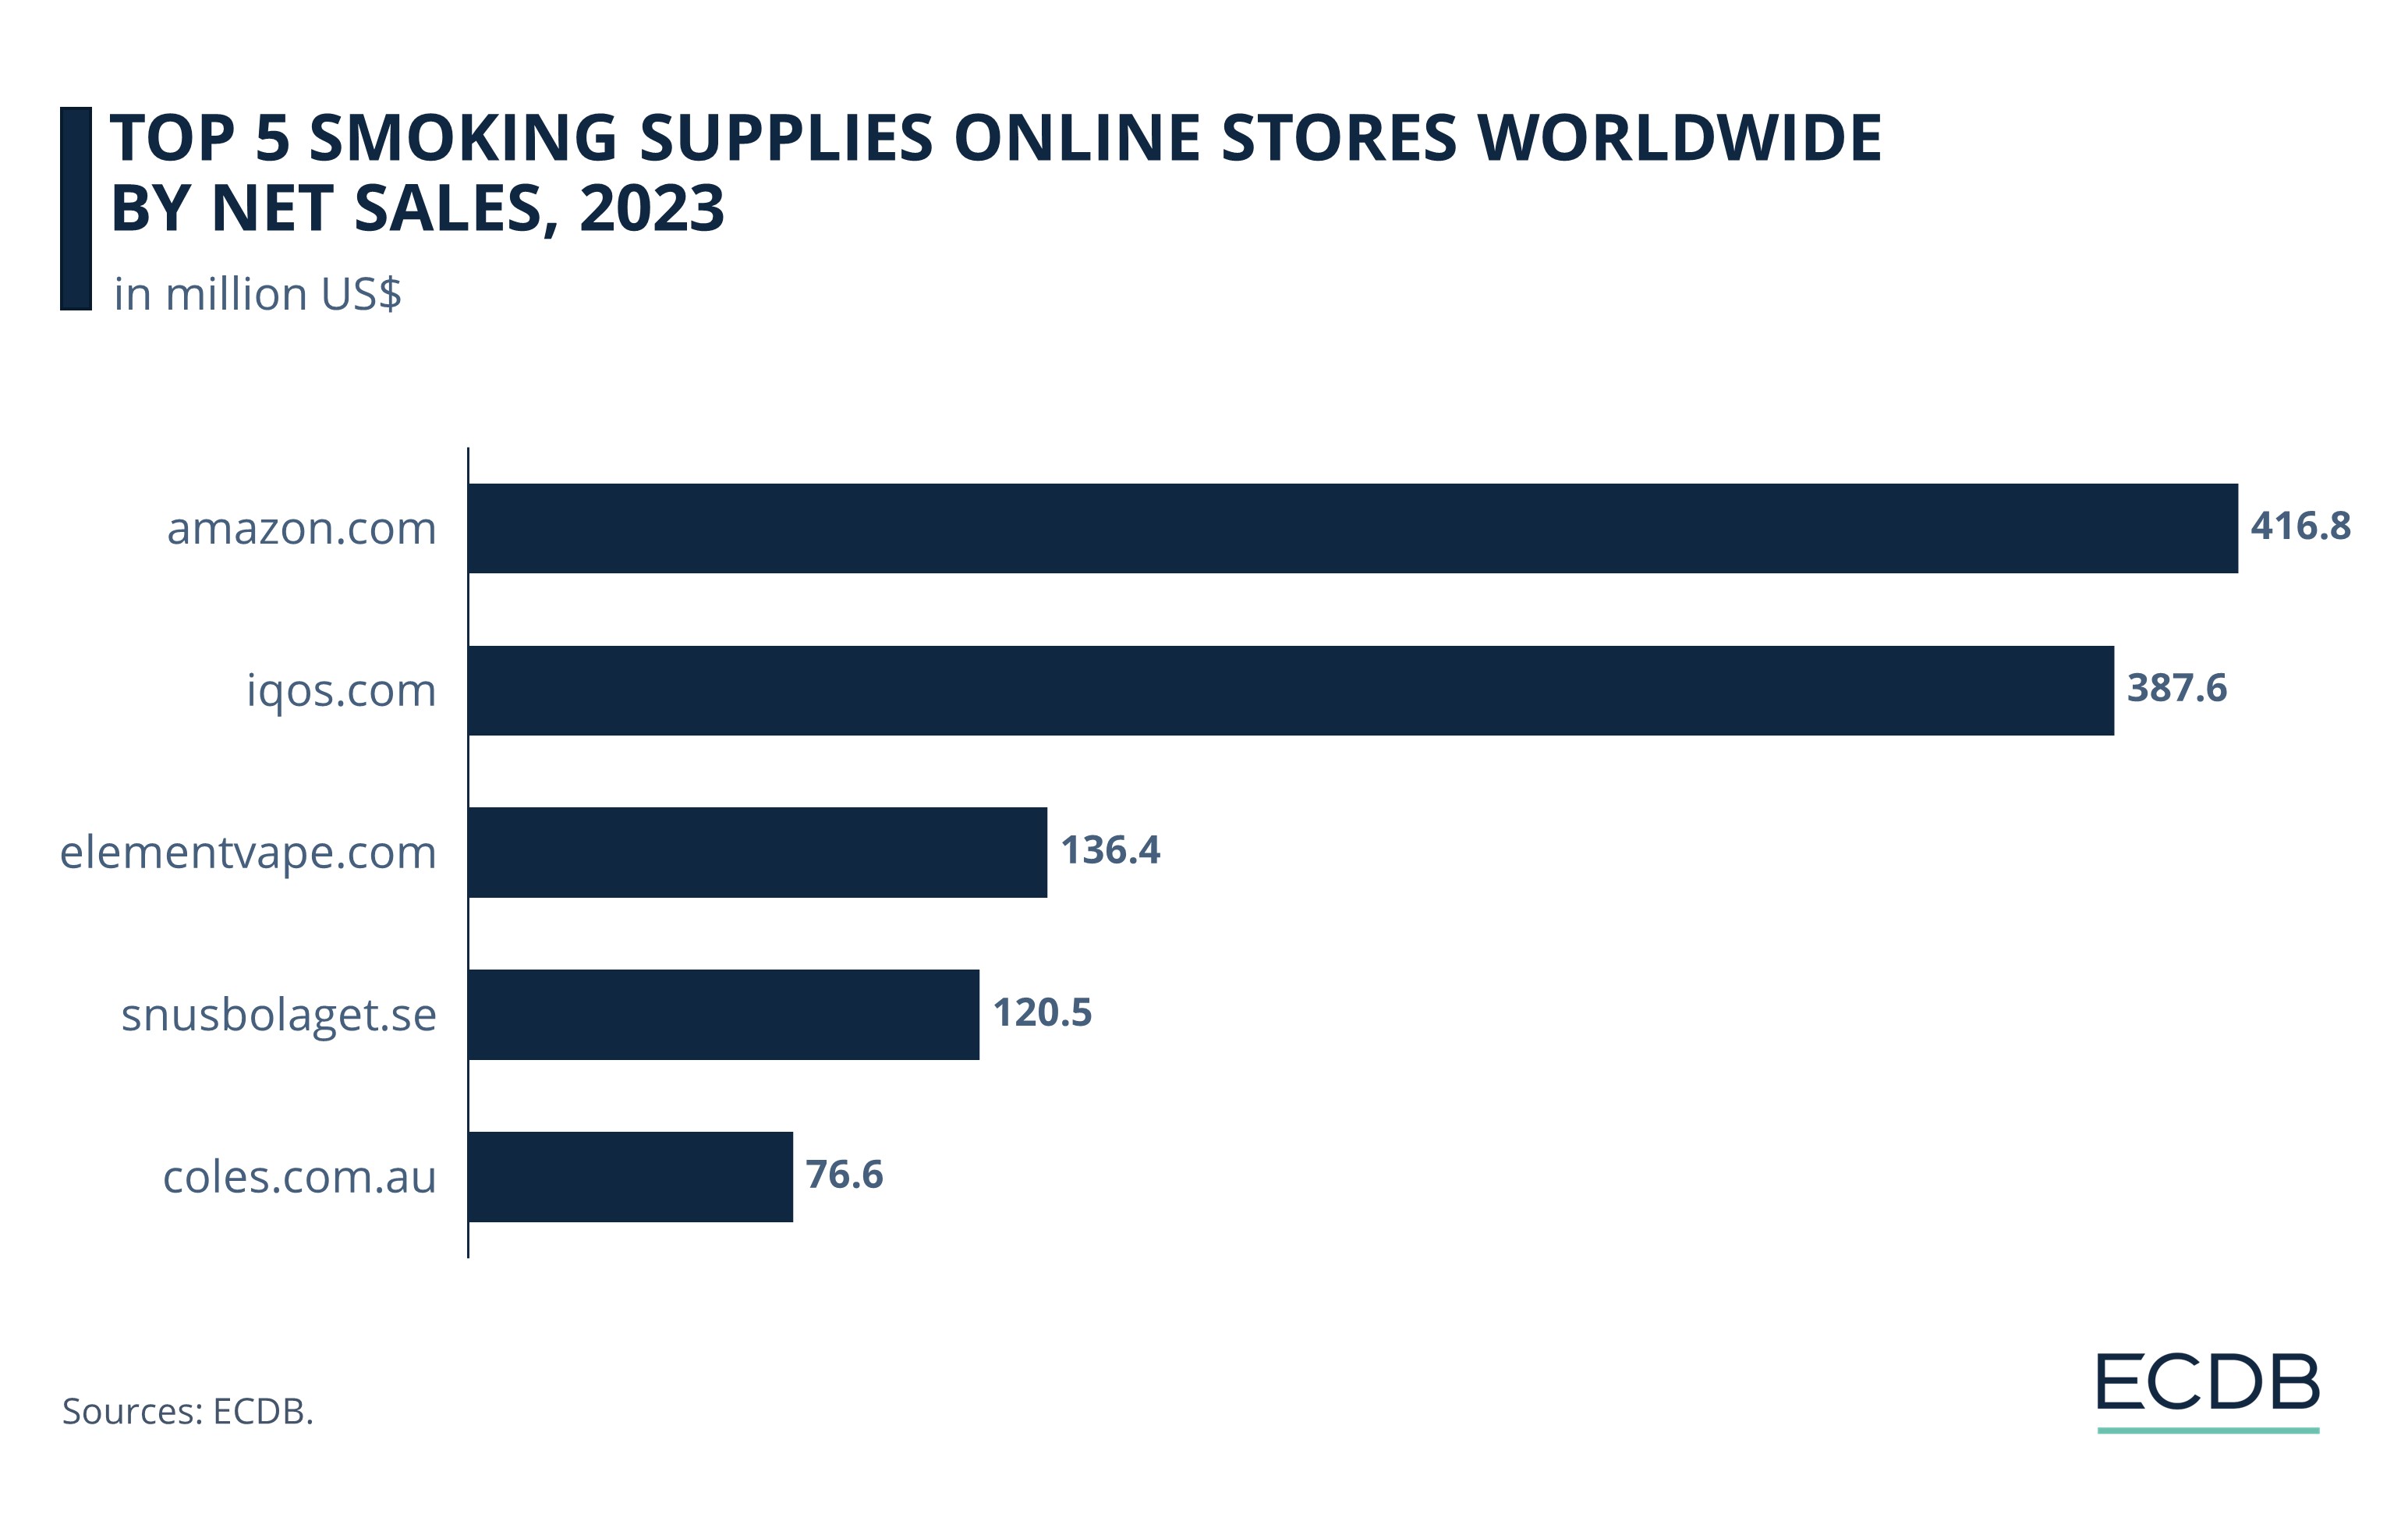 Top 5 Smoking Supplies Online Stores Worldwide by Net Sales, 2023